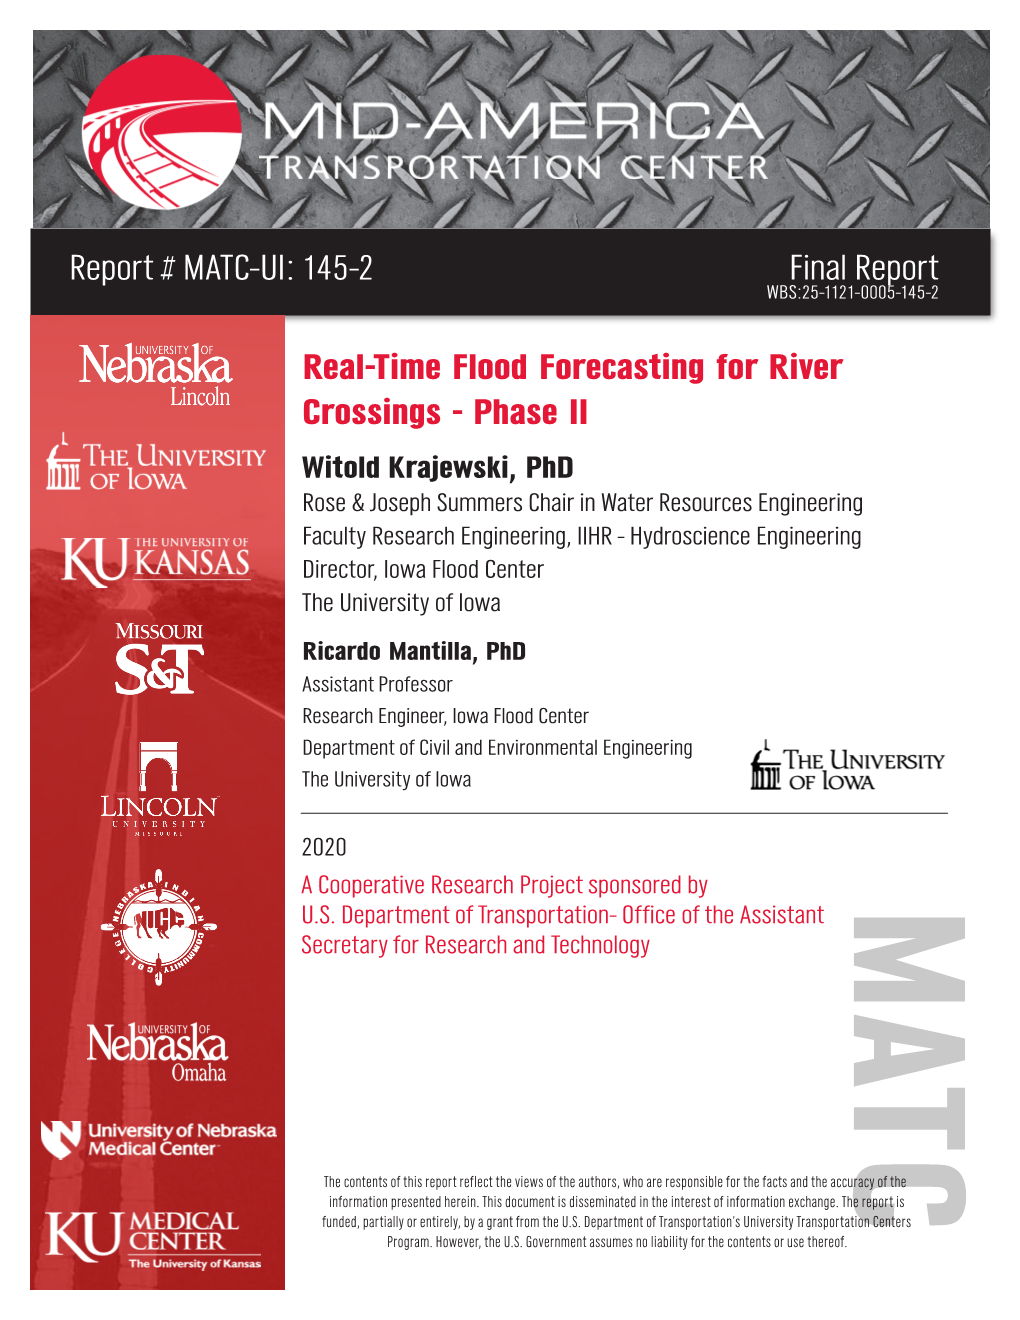 Real-Time Flood Forecasting for River Crossings